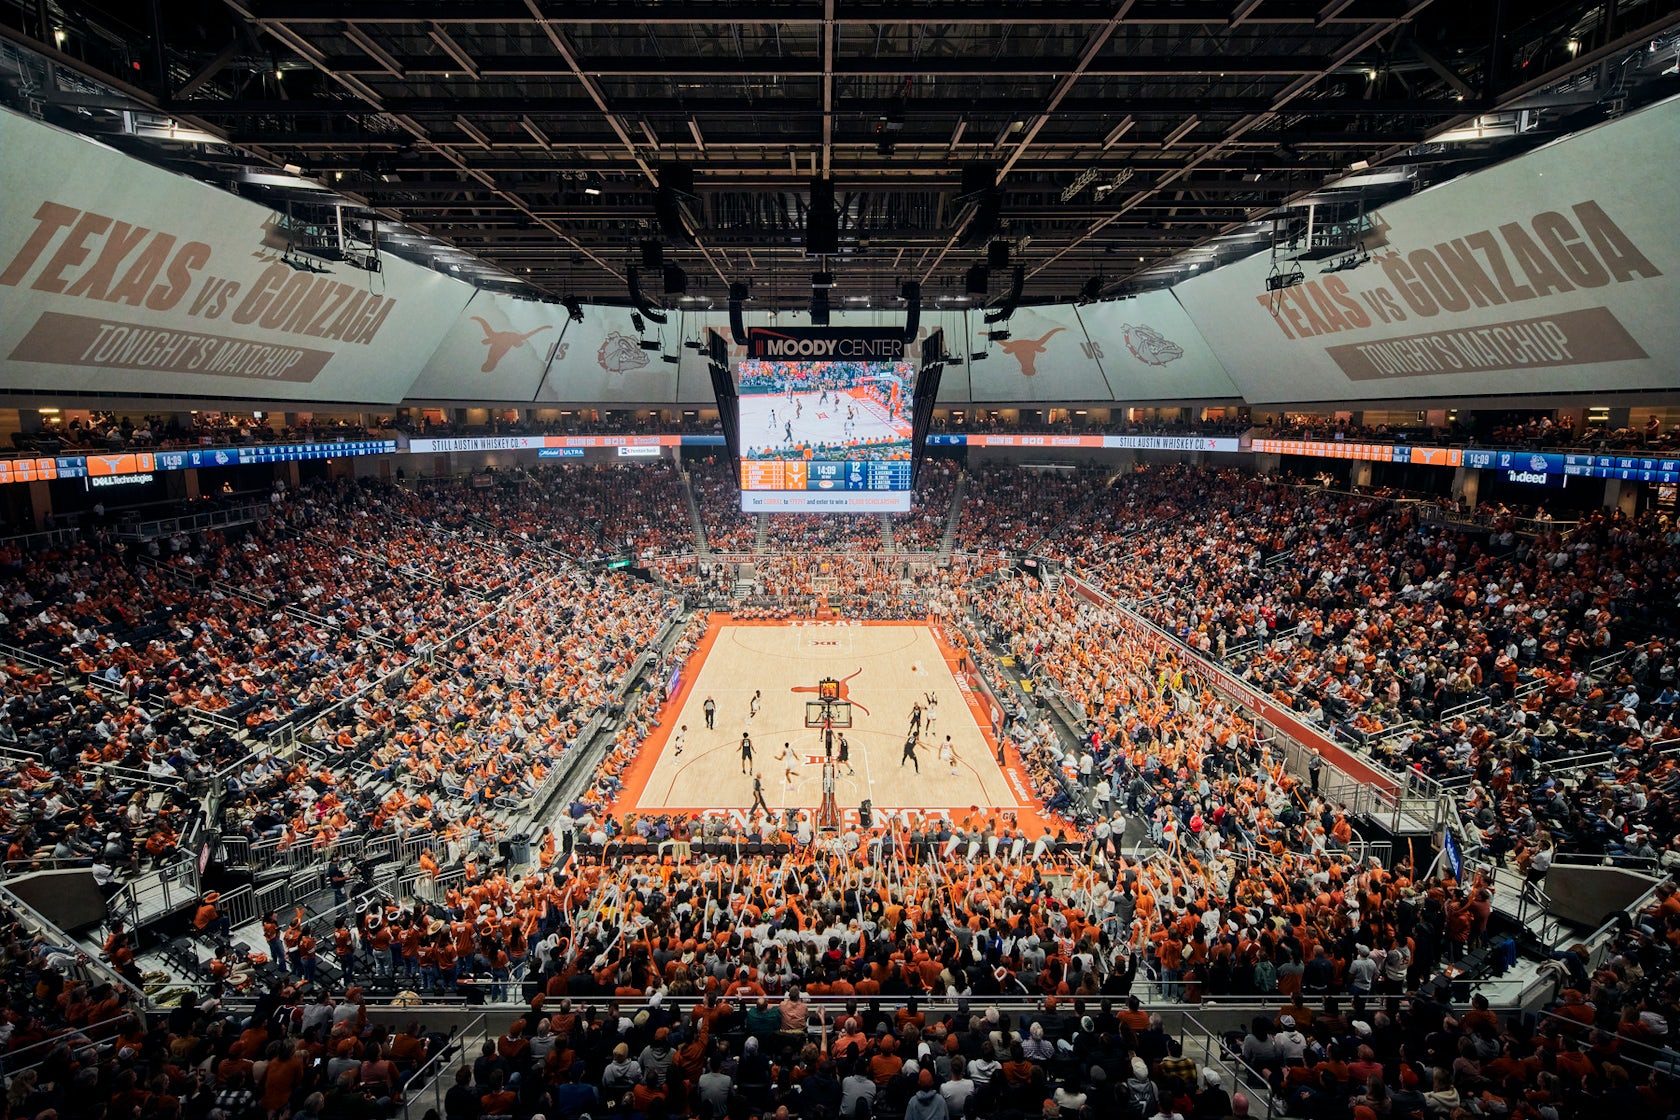 University of Texas at Austin Moody Center Basketball and Events Arena